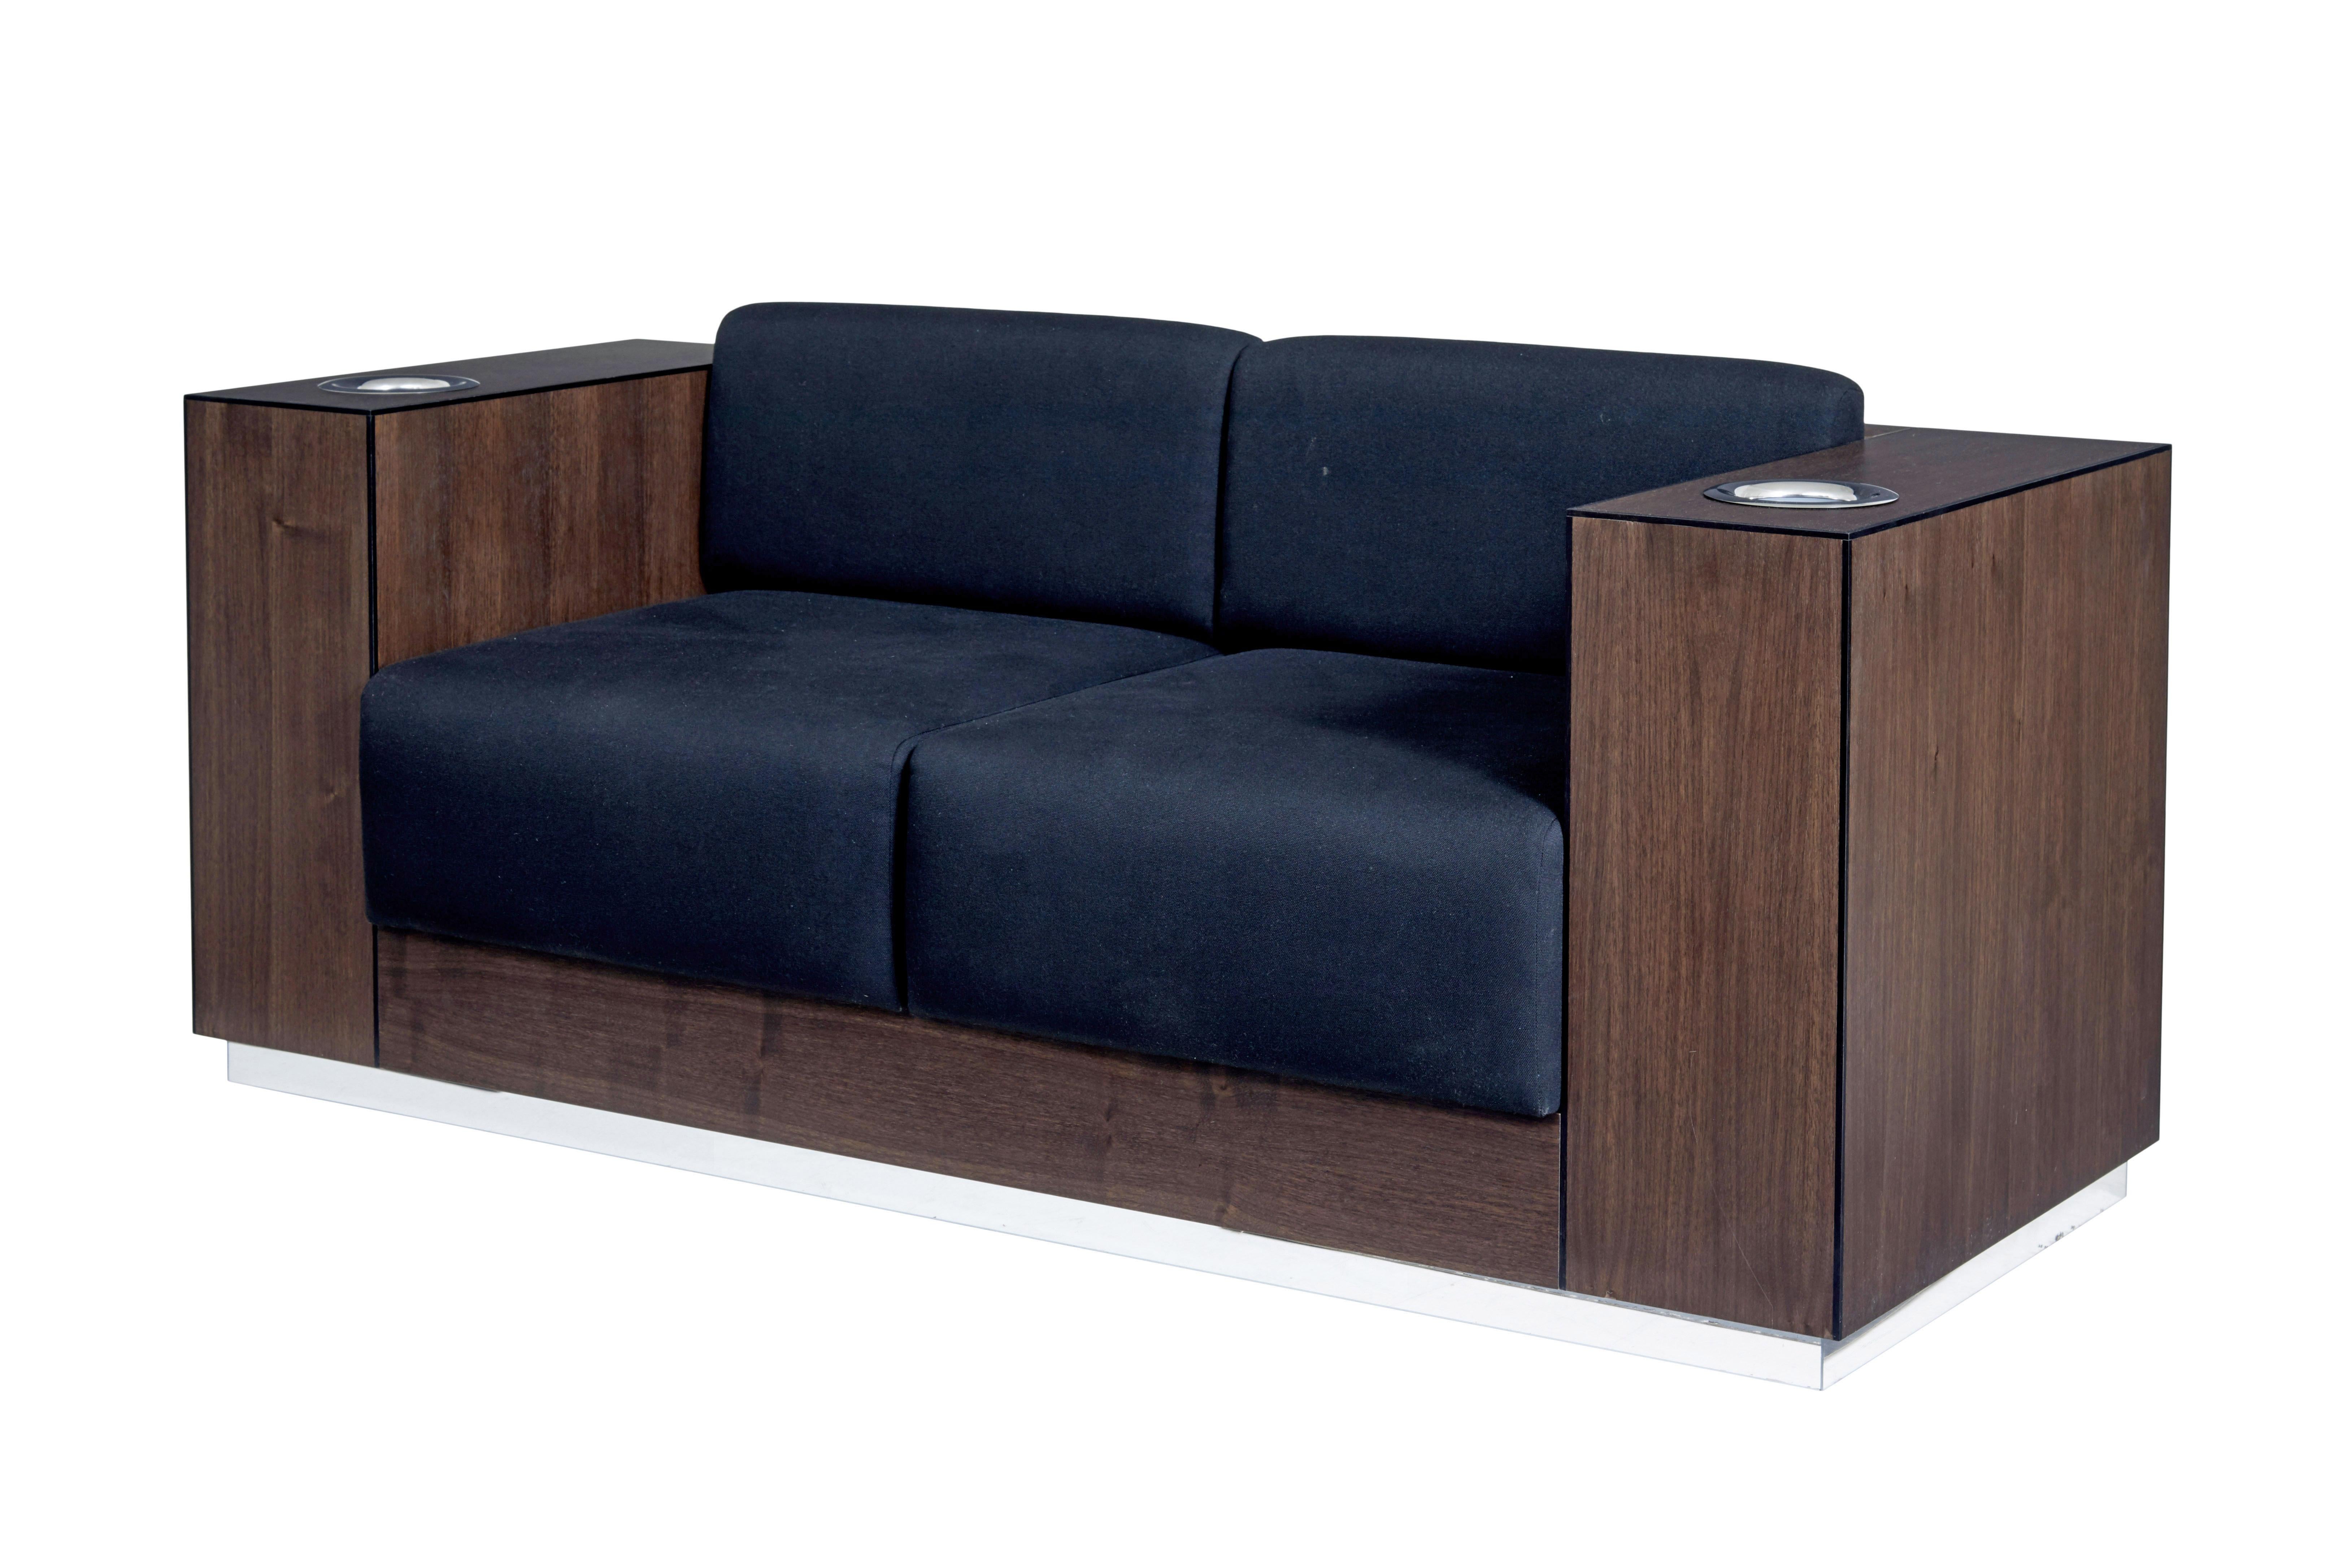 Modern walnut sofa fitted with kaelo wine coolers.

We are please to offer this unique bespoke made sofa which features a kaelo wine cooler in each arm.  This piece was made for an exhibition on the kaelo trade stand to showpiece their design, so